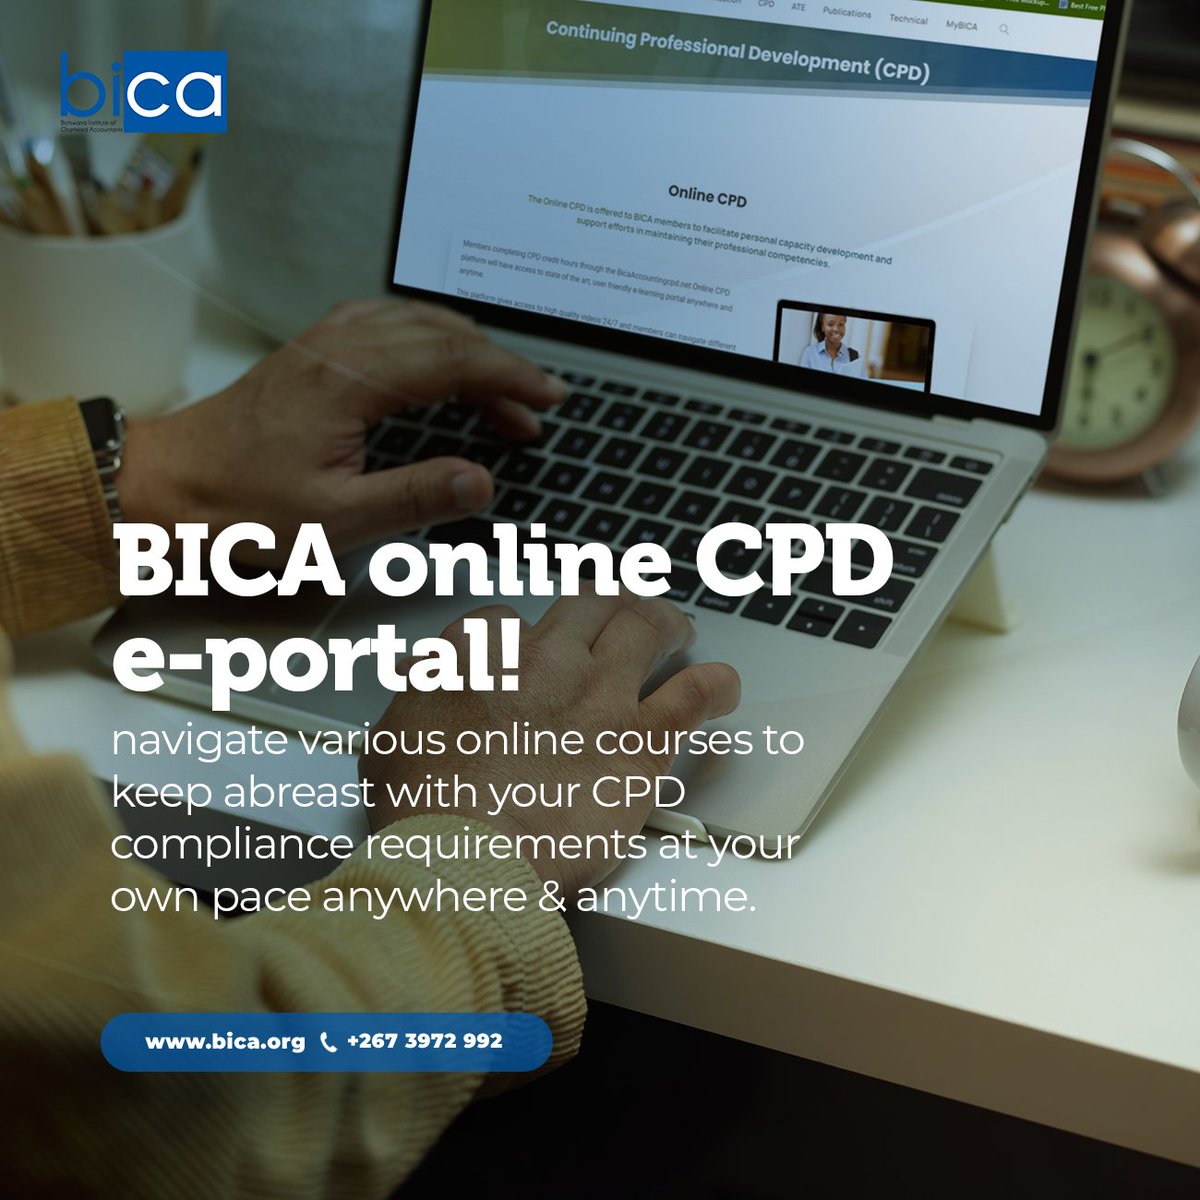 Maximize your professional development with BICA’s e-Portal. Complete your CPD hours with ease and convenience, anytime, anywhere! #BICA #BICACPD #StayAheadOfTheCurve